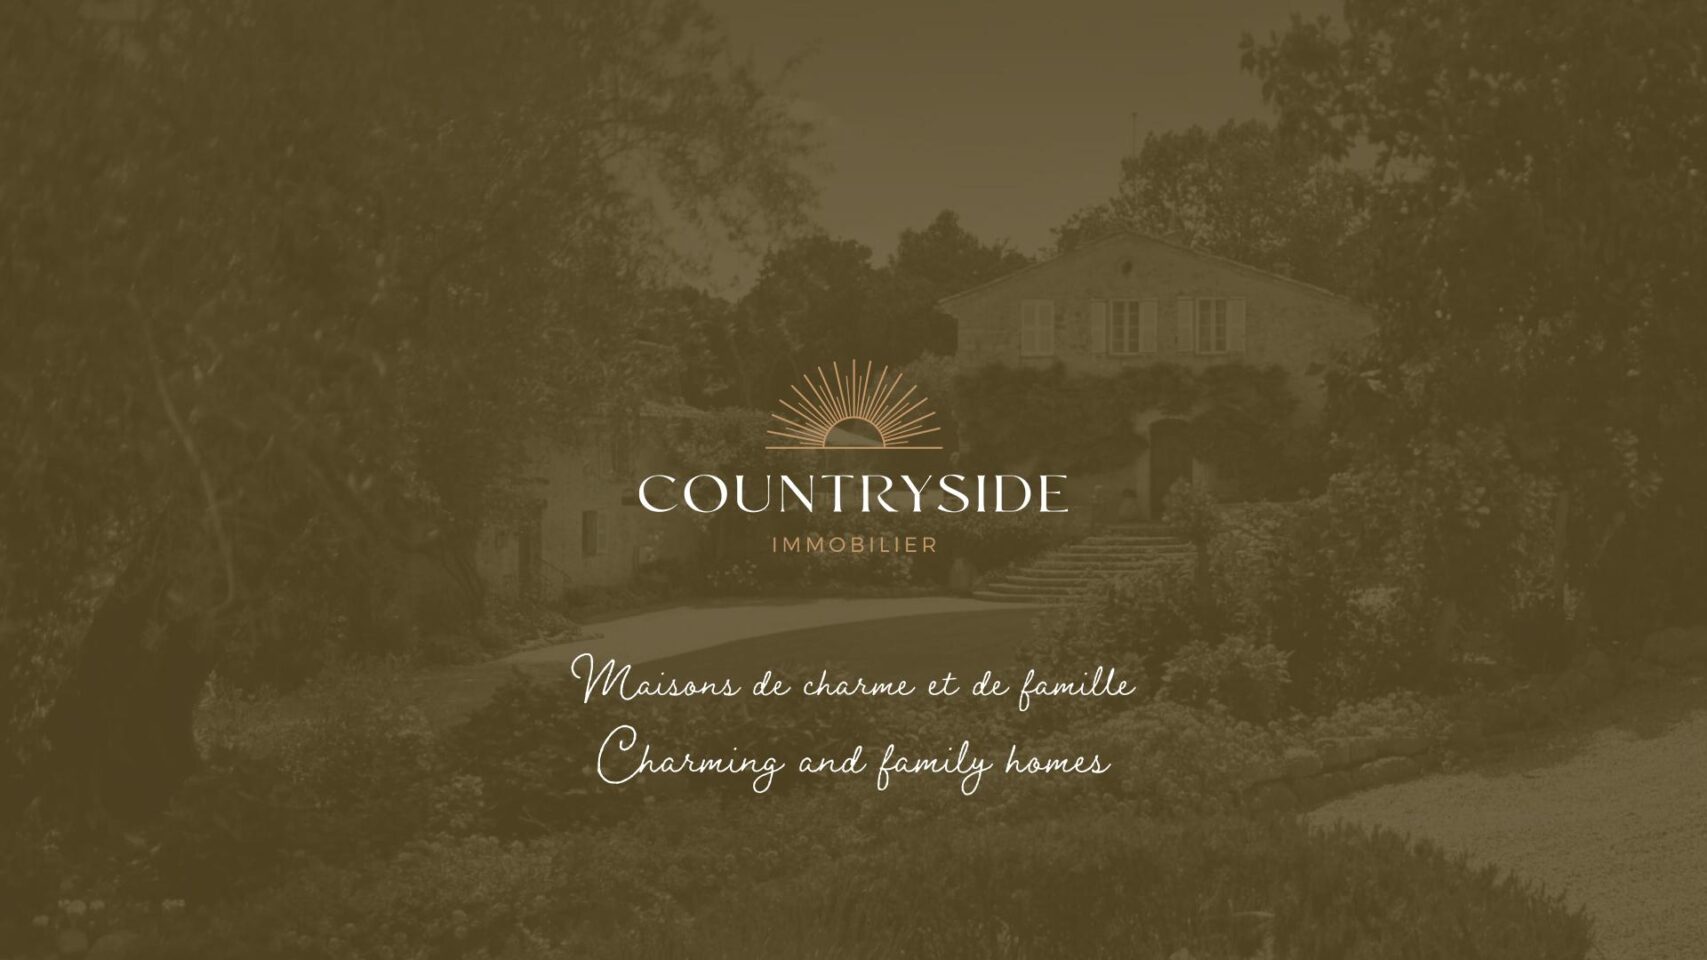 Countryside immobilier